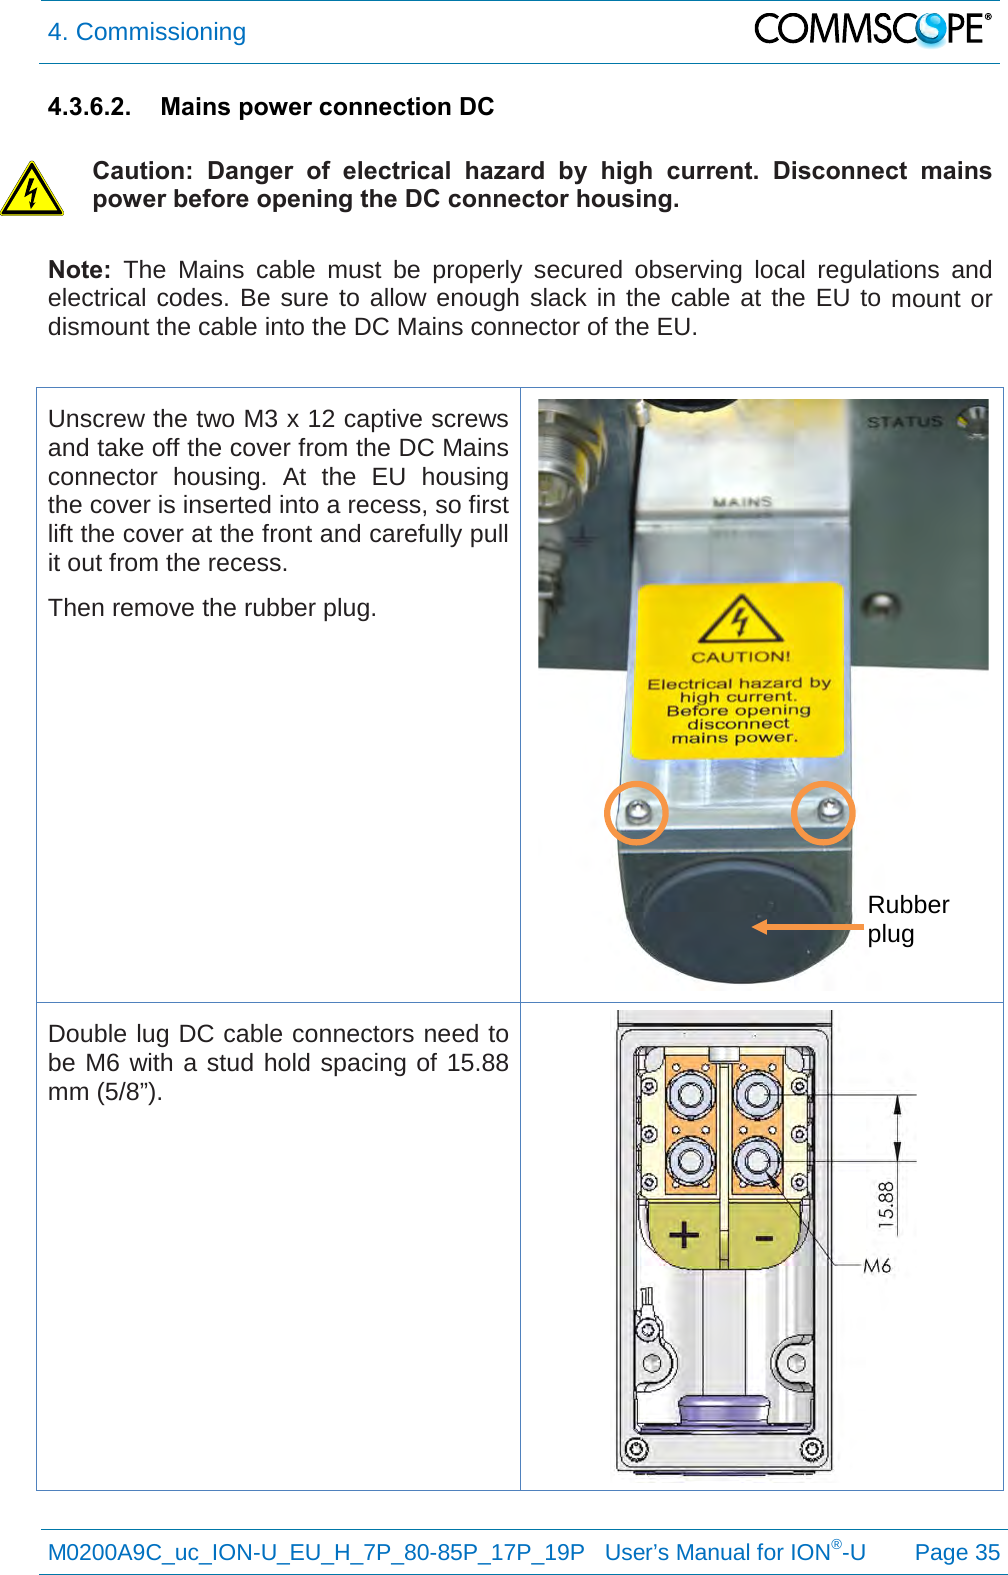 4. Commissioning   M0200A9C_uc_ION-U_EU_H_7P_80-85P_17P_19P   User’s Manual for ION®-U  Page 35  4.3.6.2. Mains power connection DC  Caution: Danger of electrical hazard by high current.  Disconnect mains power before opening the DC connector housing. Note: The Mains cable must be properly secured observing local regulations and electrical codes. Be sure to allow enough slack in the cable at the EU to mount or dismount the cable into the DC Mains connector of the EU.  Unscrew the two M3 x 12 captive screws and take off the cover from the DC Mains connector housing. At the EU housing the cover is inserted into a recess, so first lift the cover at the front and carefully pull it out from the recess. Then remove the rubber plug.  Double lug DC cable connectors need to be M6 with a stud hold spacing of 15.88 mm (5/8”).     Rubber plug 